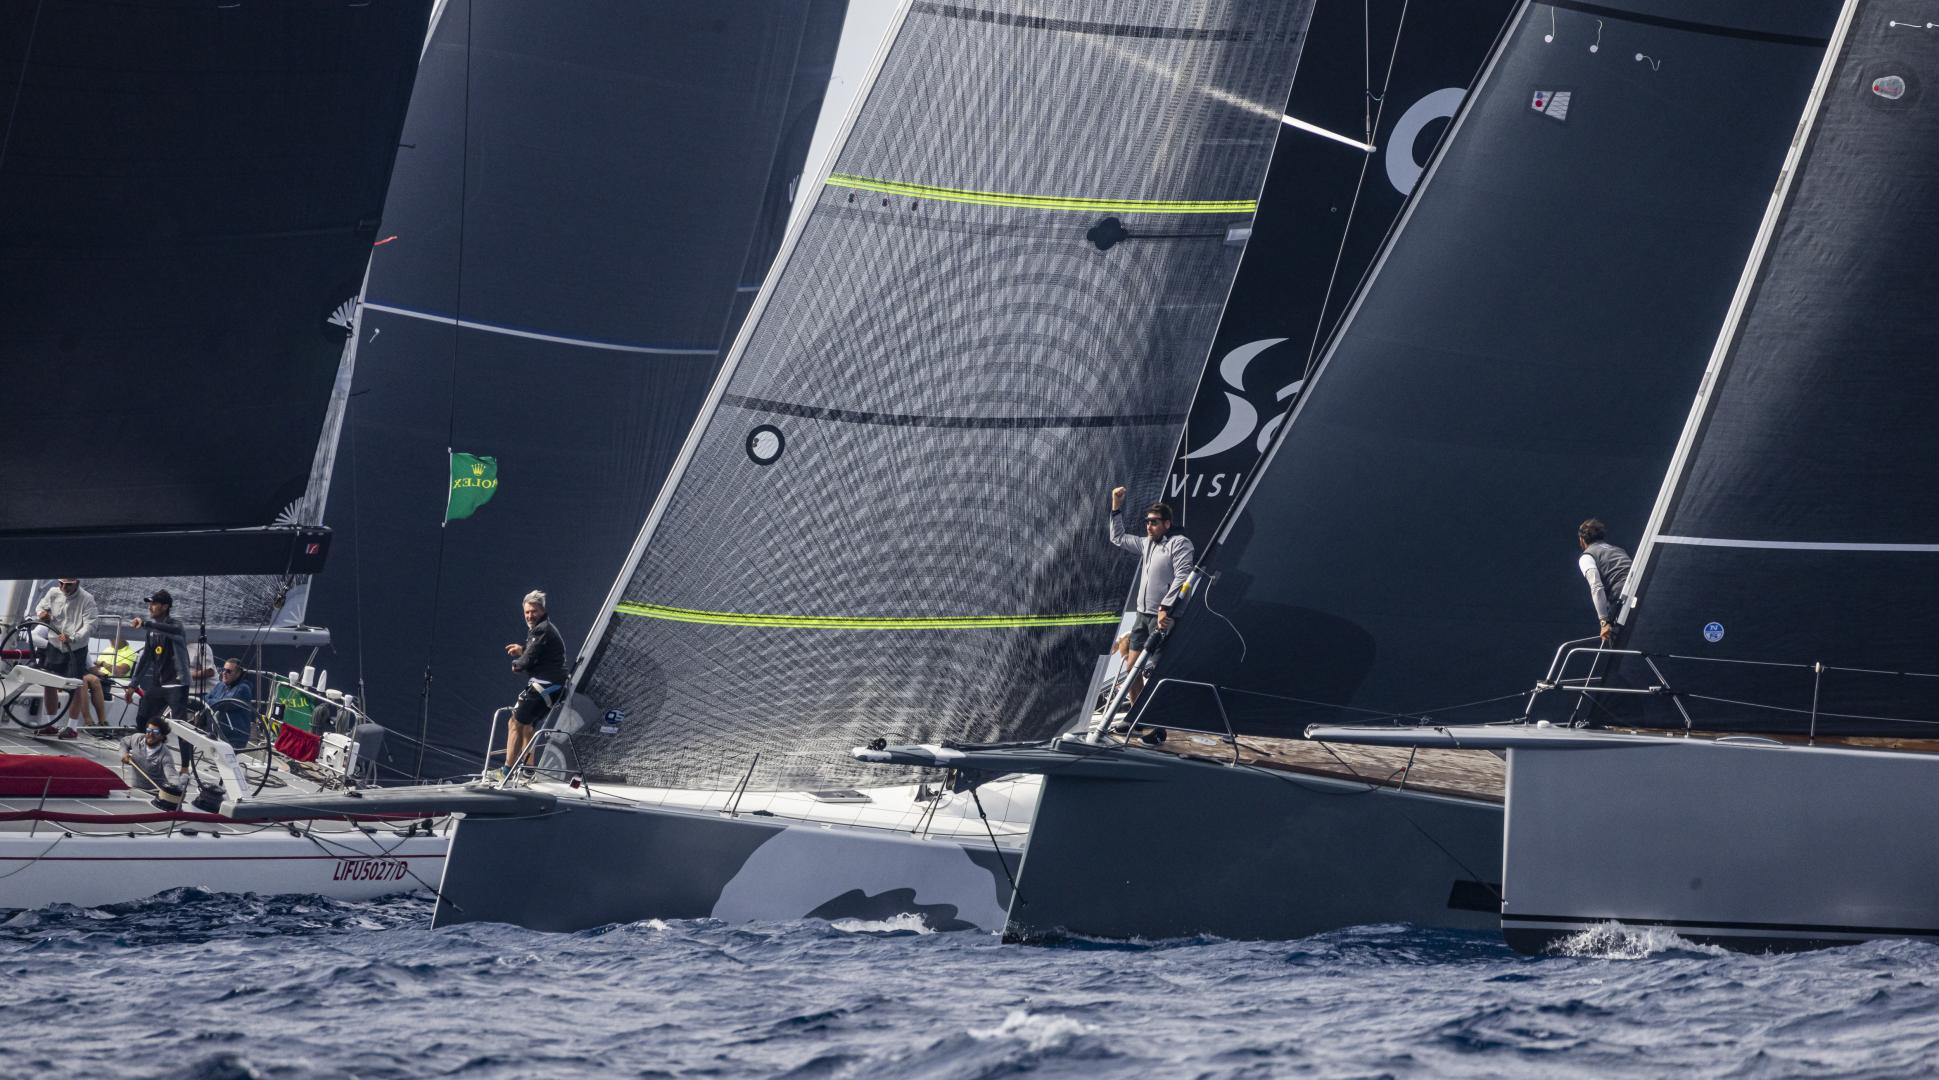 Great to see a fleet of maxi yachts competing in Capri after a year's absence due to the COVID-19 pandemic